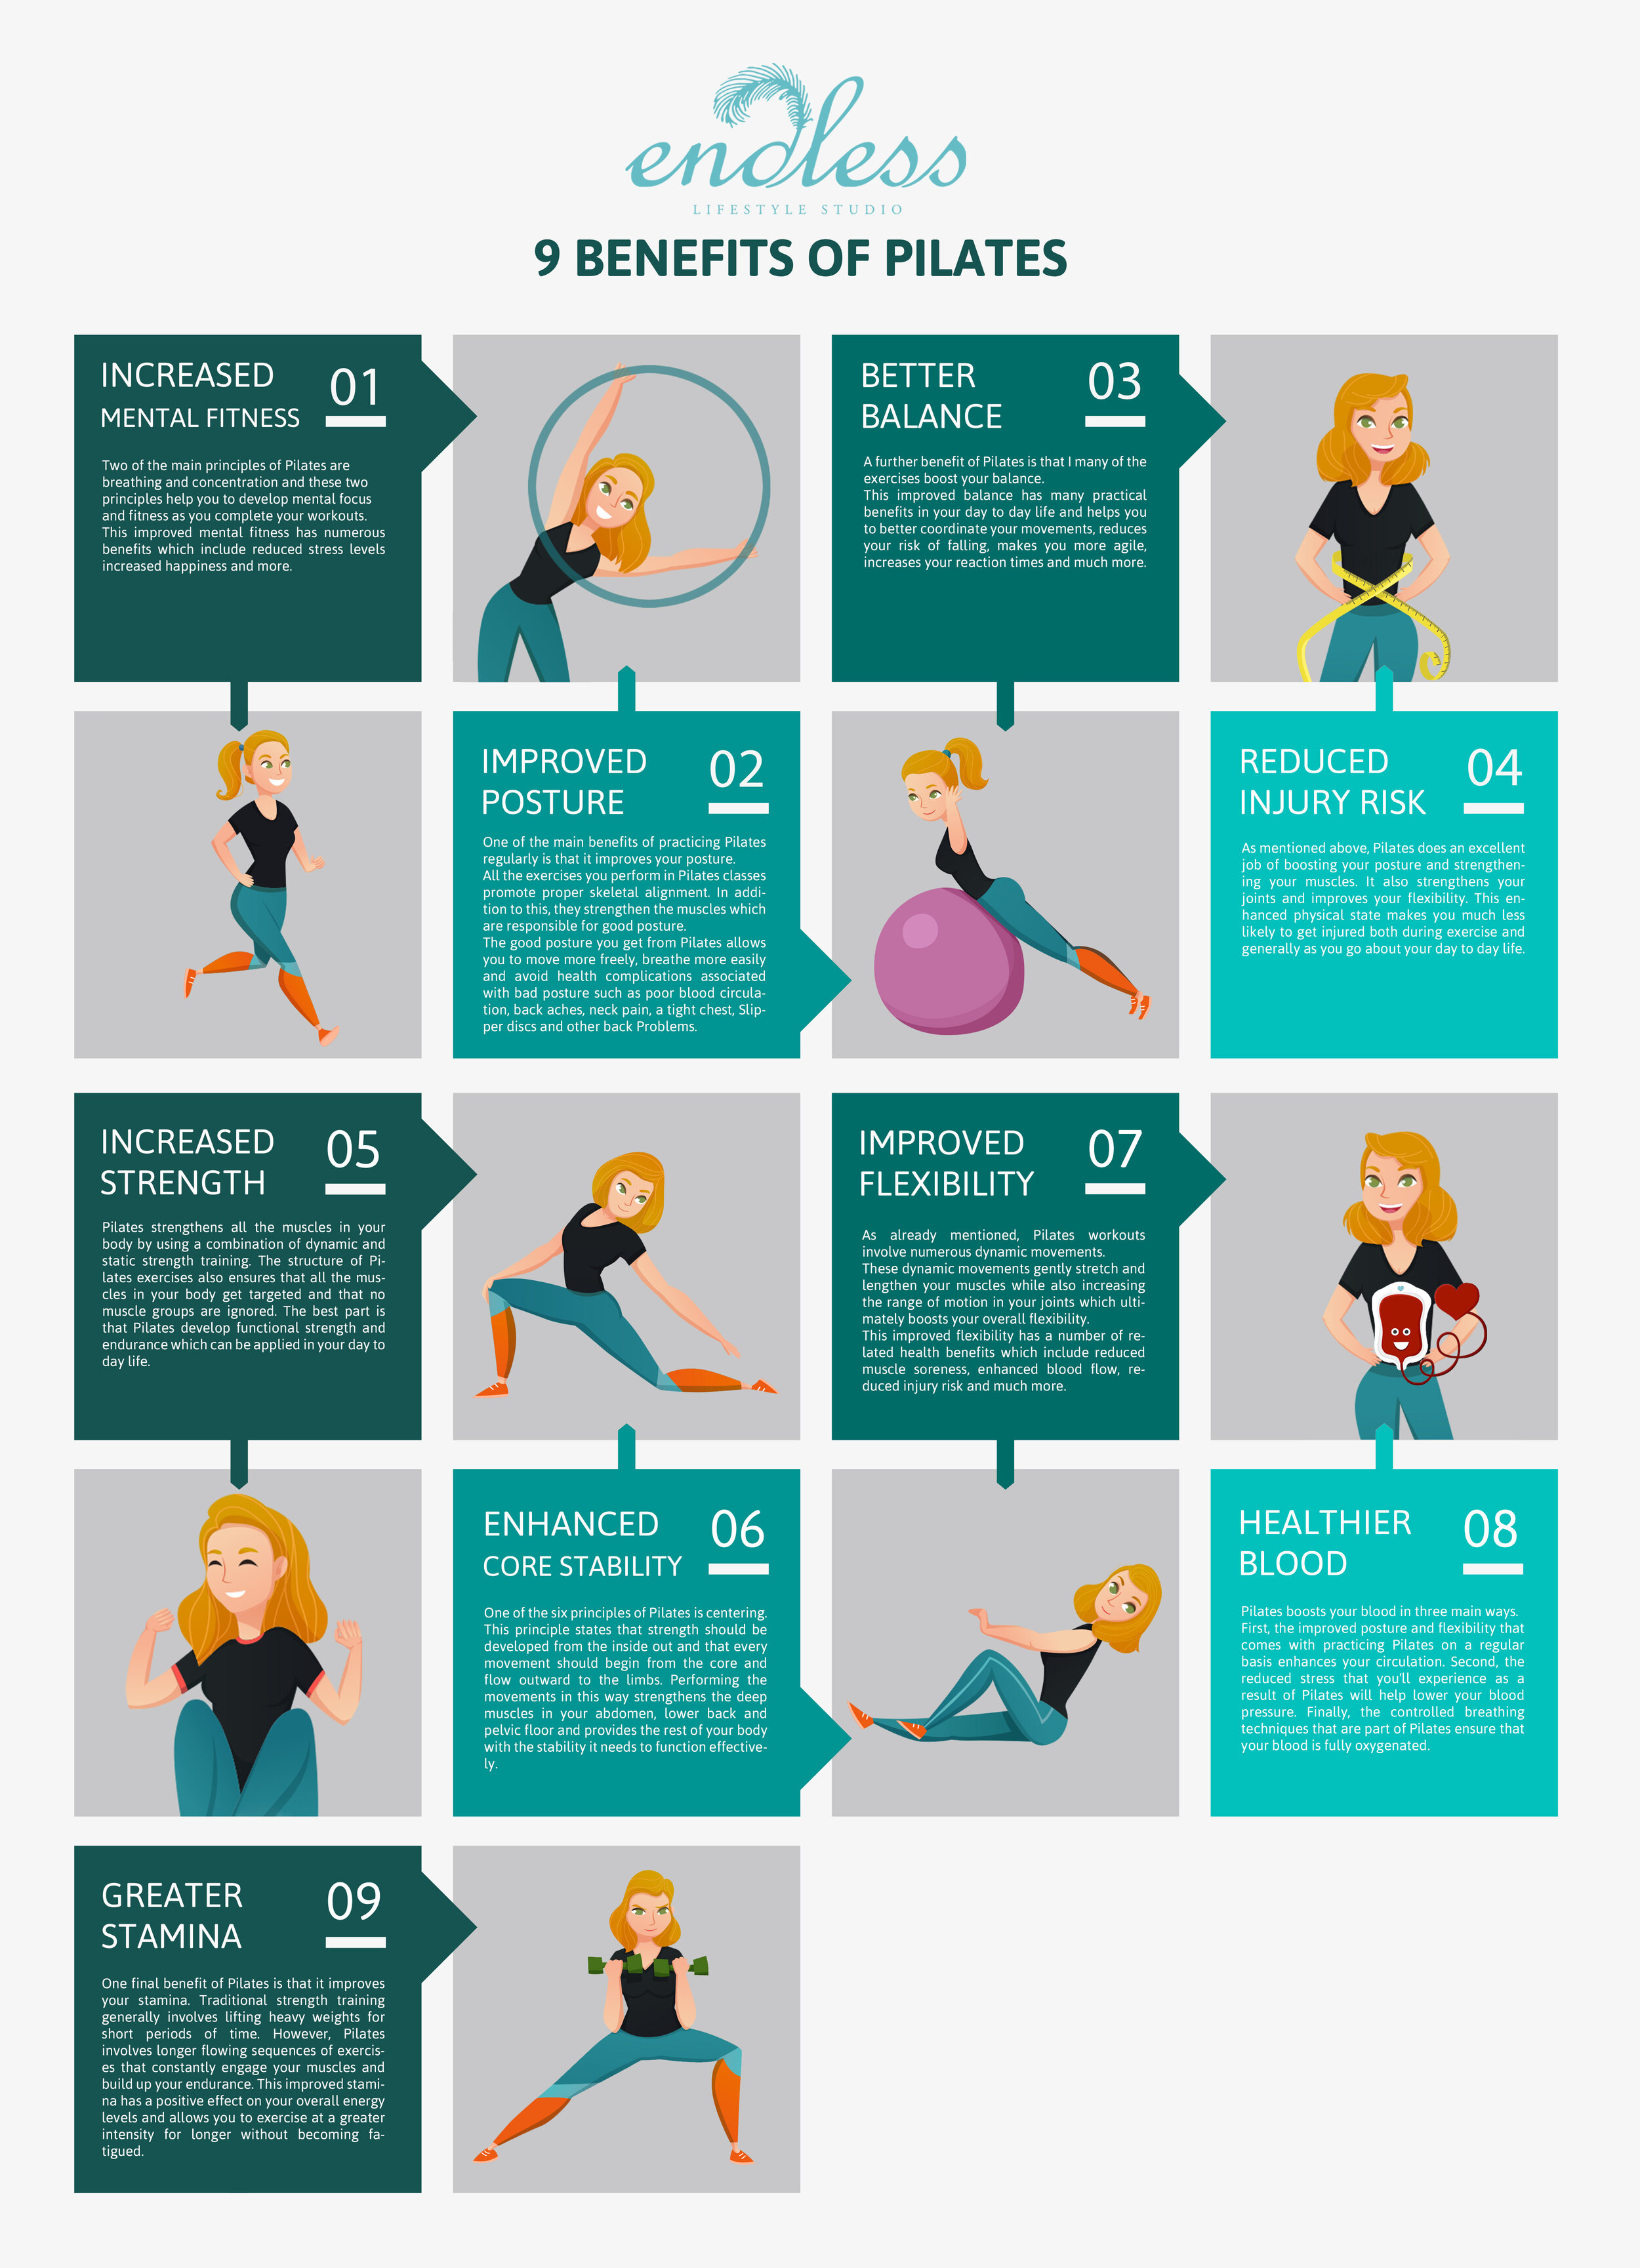 Pilates improves flexibility through its dynamic and static